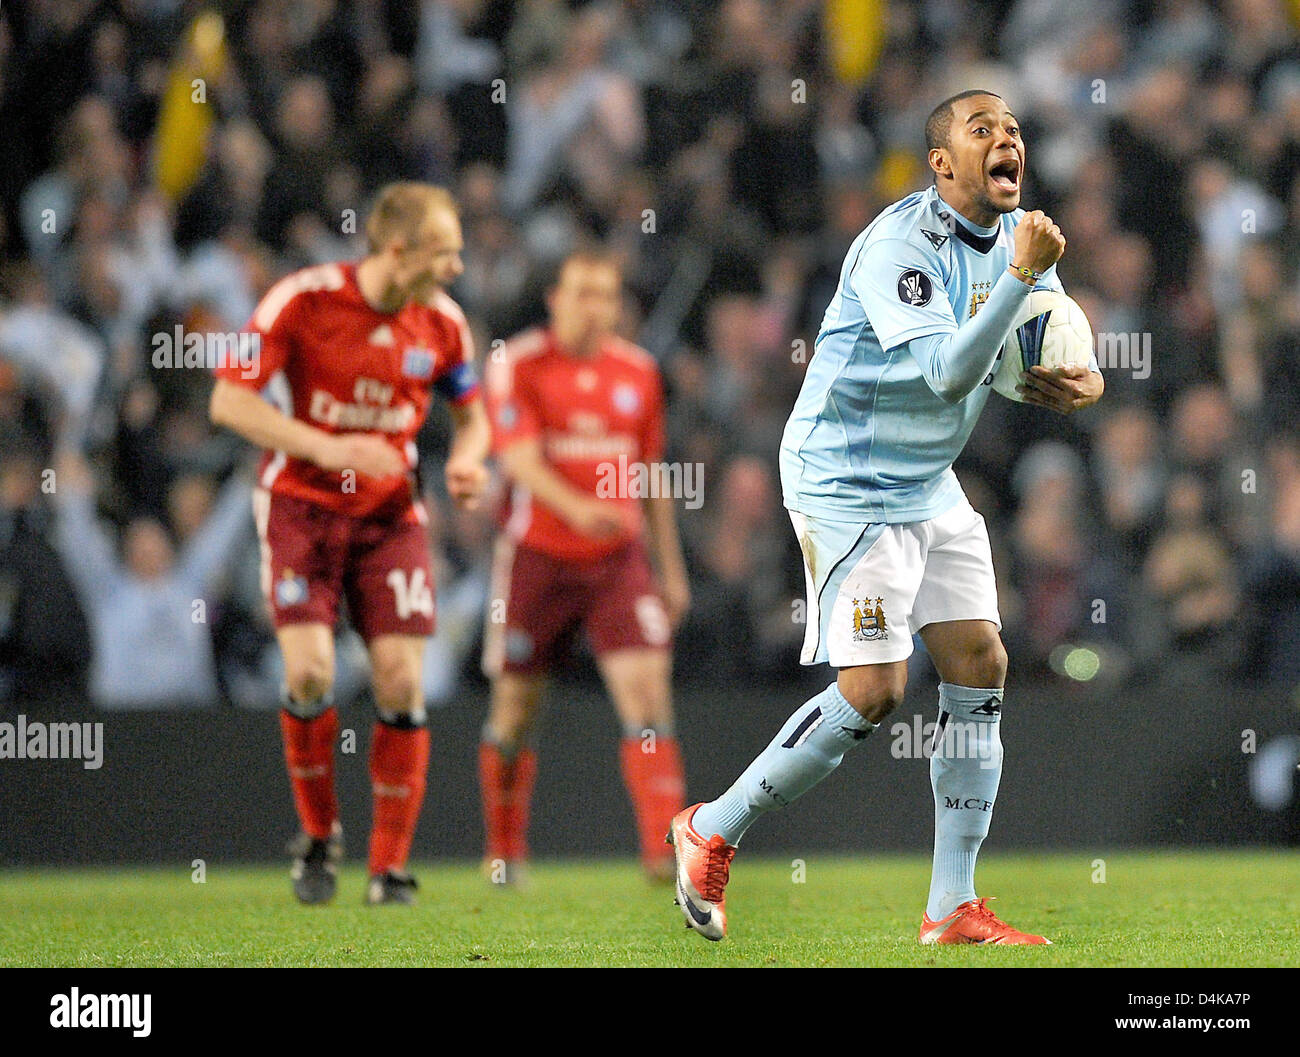 Manchester City?s Robinho (R) cheers after his goal to 2-1 during the UEFA Cup quarter finals match Manchester City vs SV Hamburg at City of Manchester stadium in Manchester, United Kingdom, 16 April 2009. Manchester City defeated SV Hamburg 2-1. Photo: Marcus Brandt Stock Photo